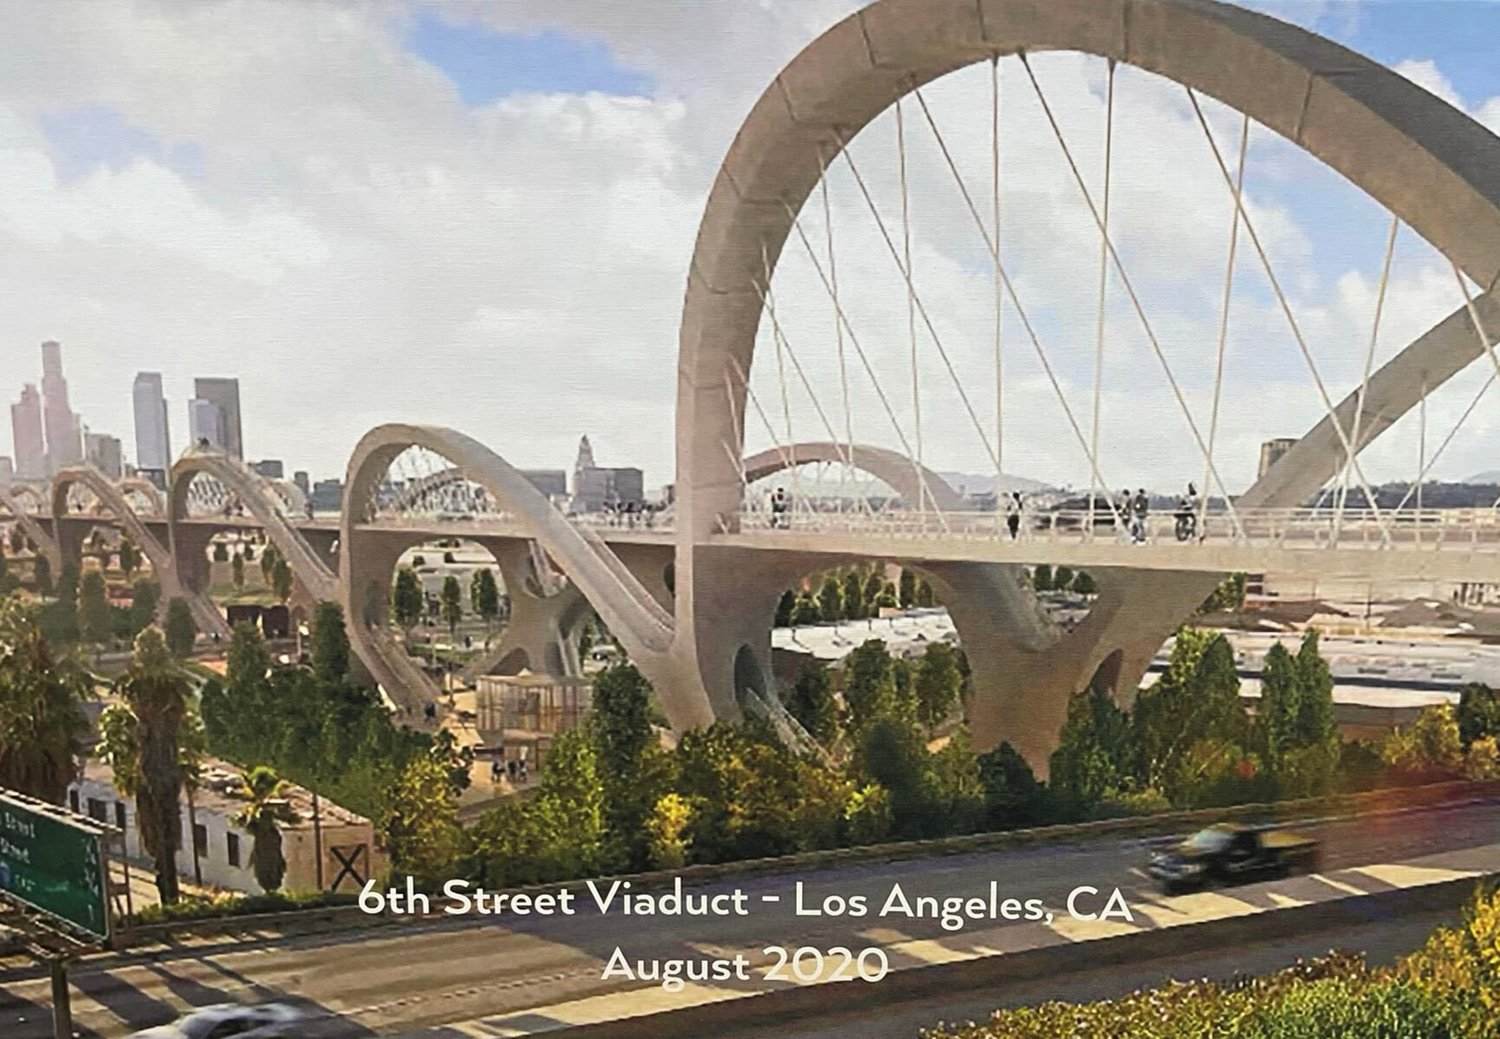 The 6th Street Viaduct in Los Angeles.